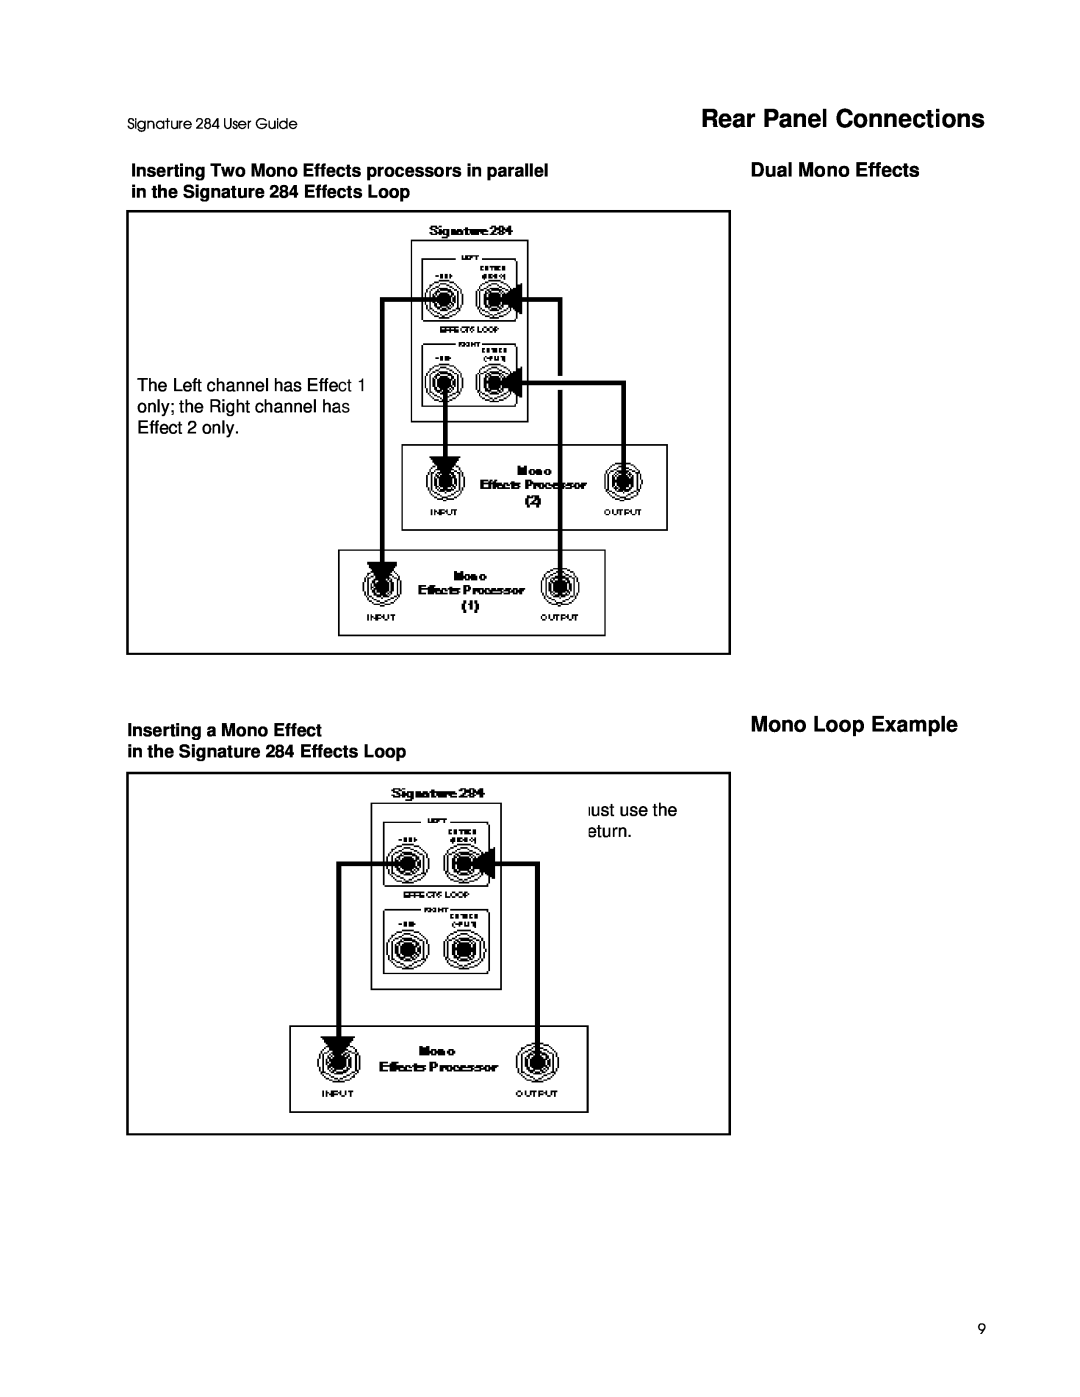 Lexicon 284 manual Mono Loop Example, Rear Panel Connections, Dual Mono Effects, Inserting a Mono Effect 